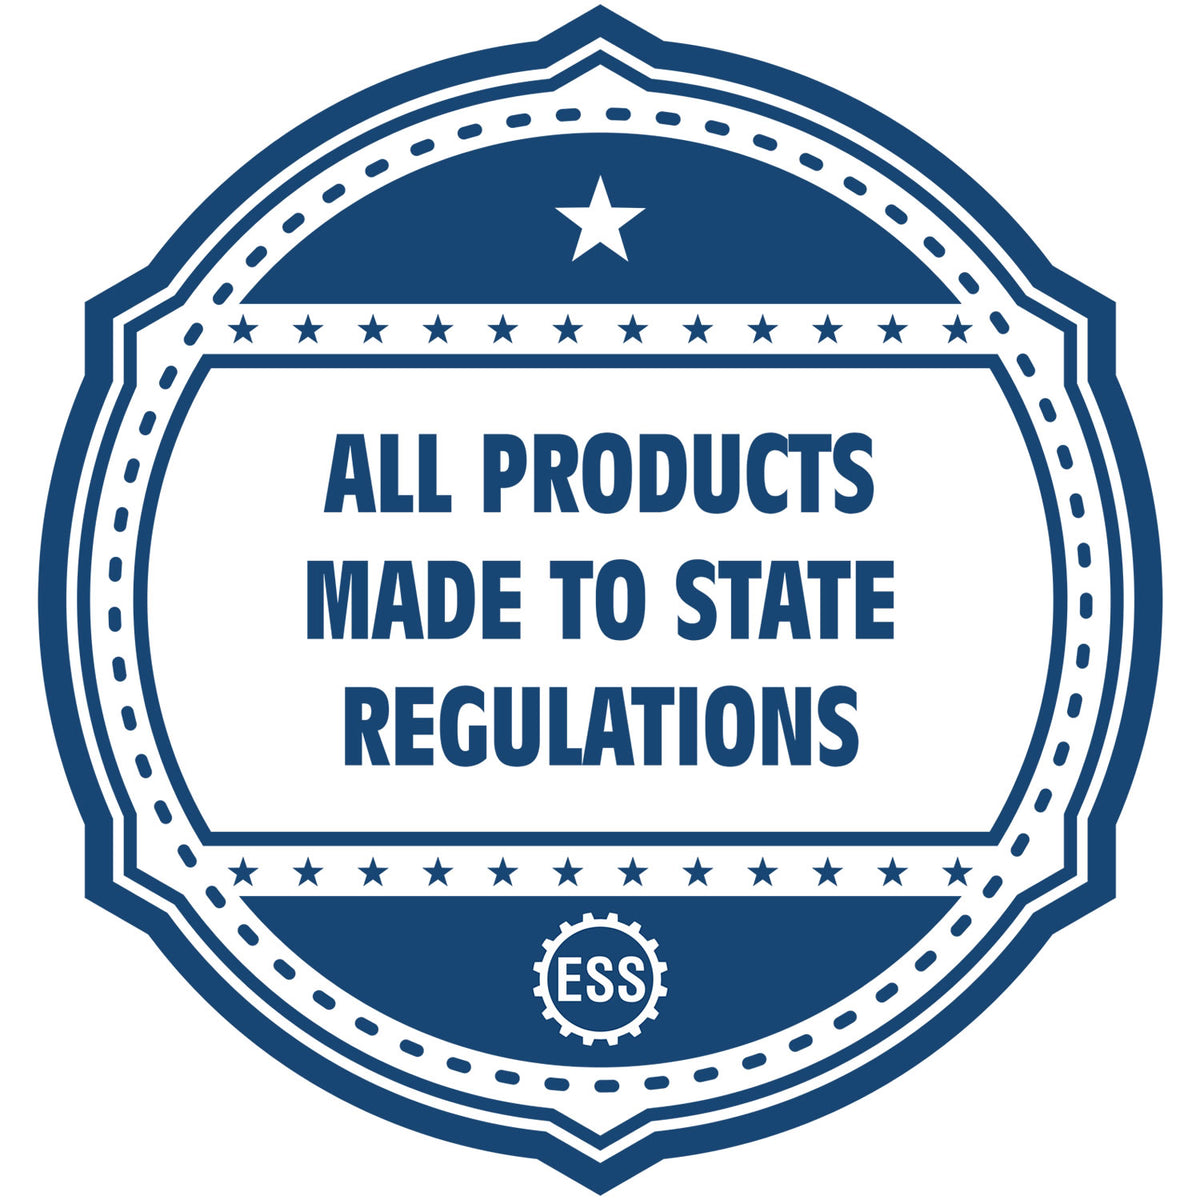 An icon or badge element for the Slim Pre-Inked New York Land Surveyor Seal Stamp showing that this product is made in compliance with state regulations.